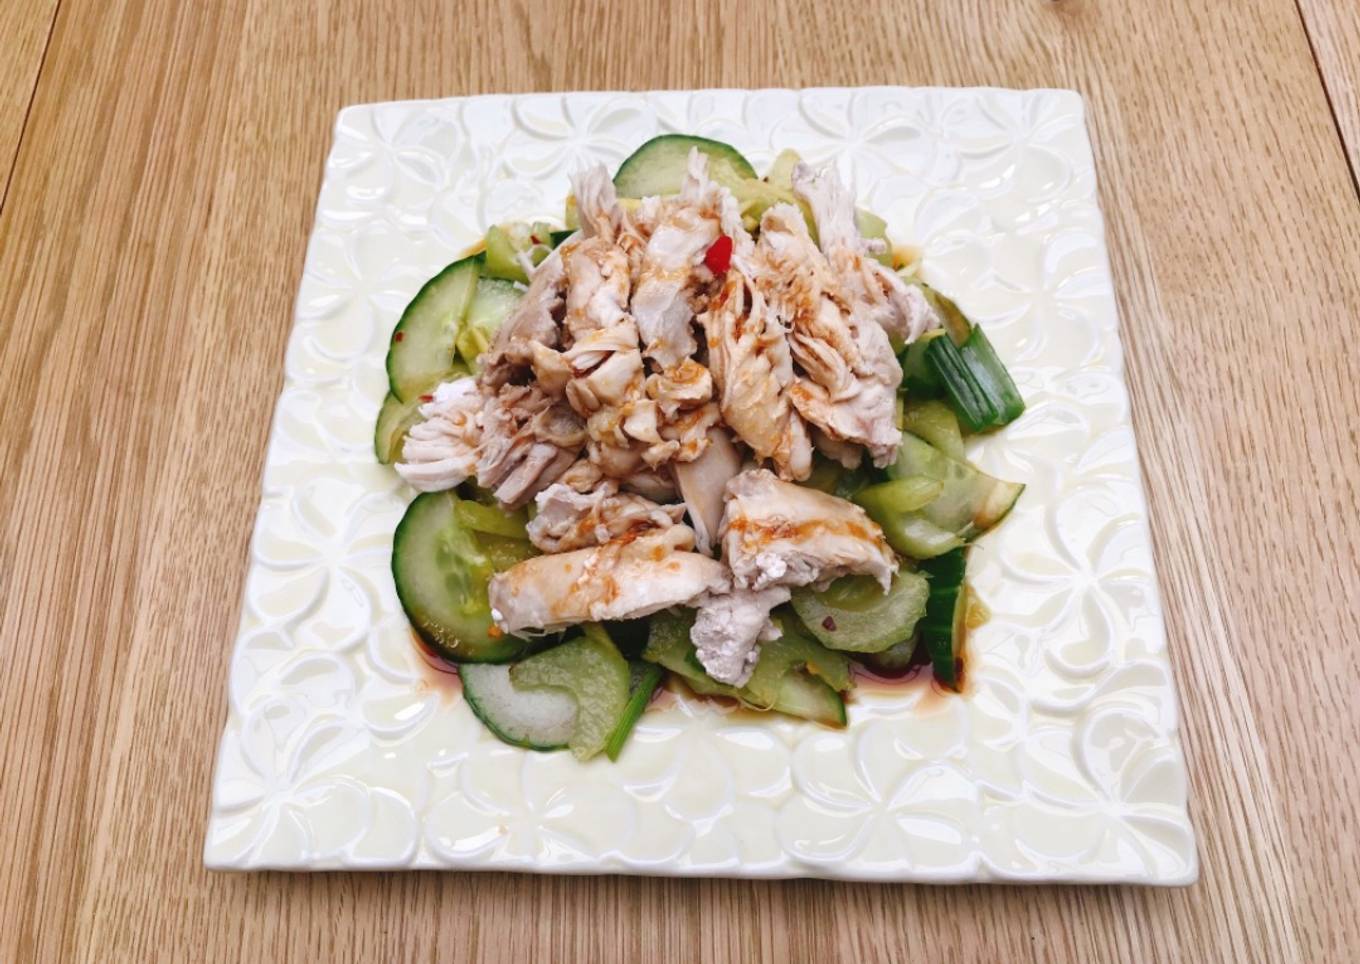 Chicken cucumber and celery salad